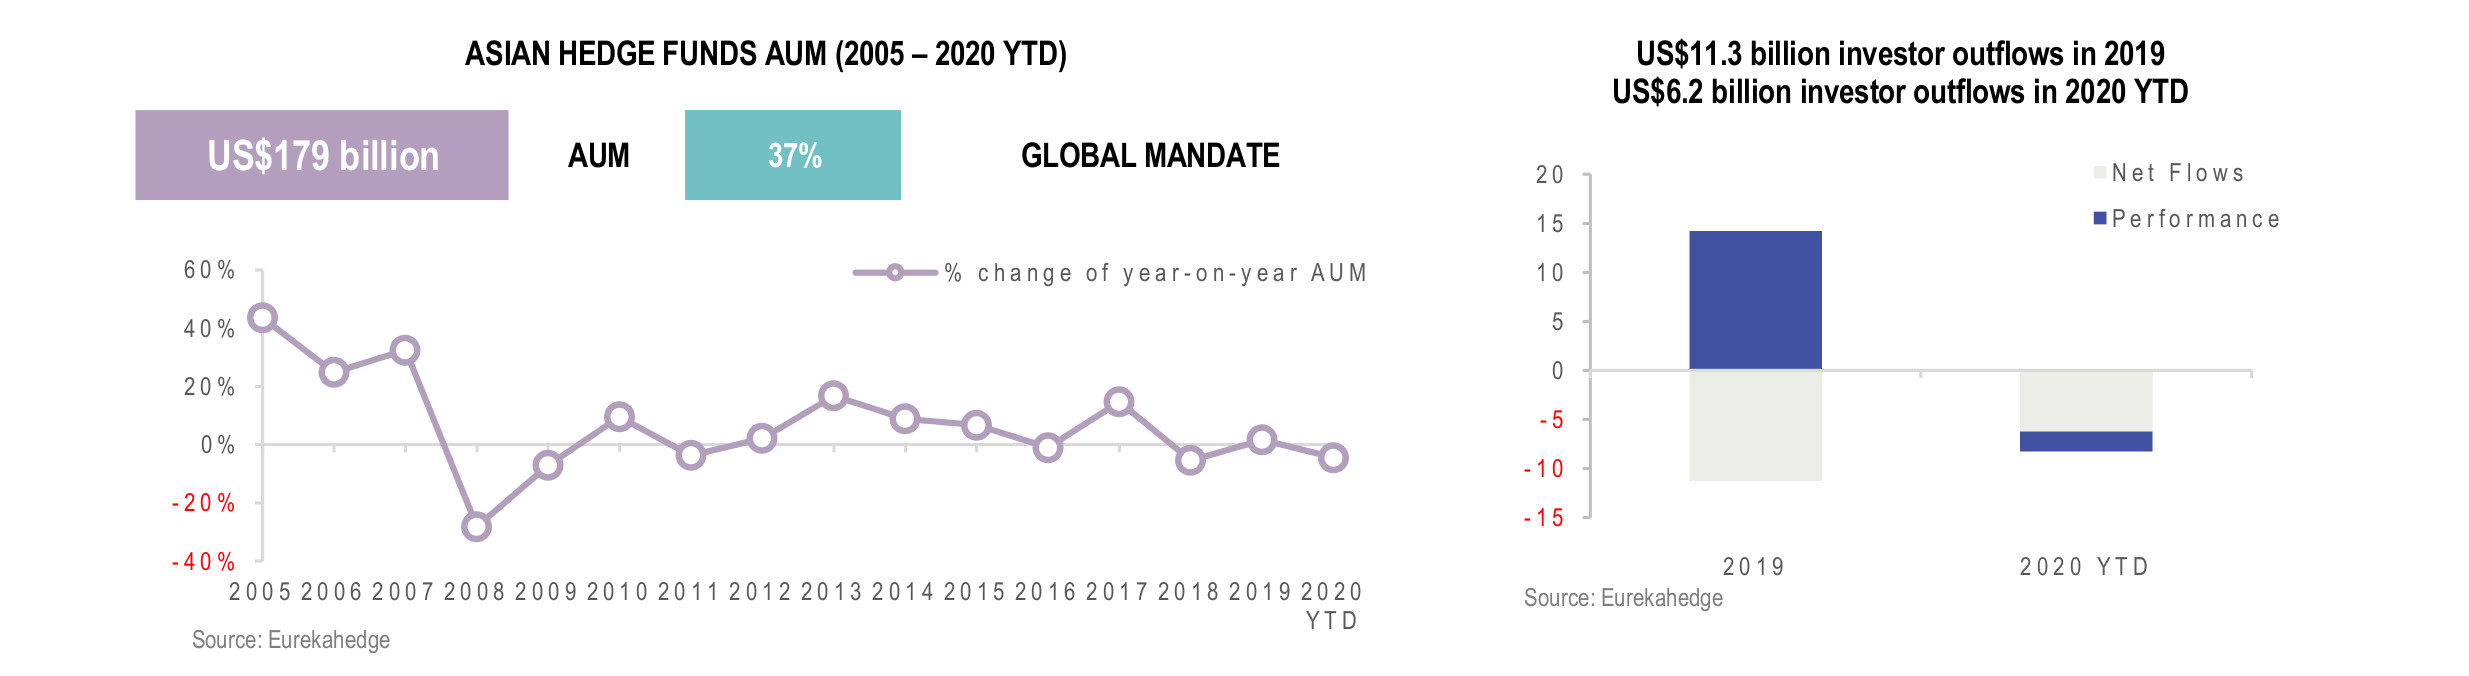 Asian Hedge Funds Infographic August 2020 - AUM